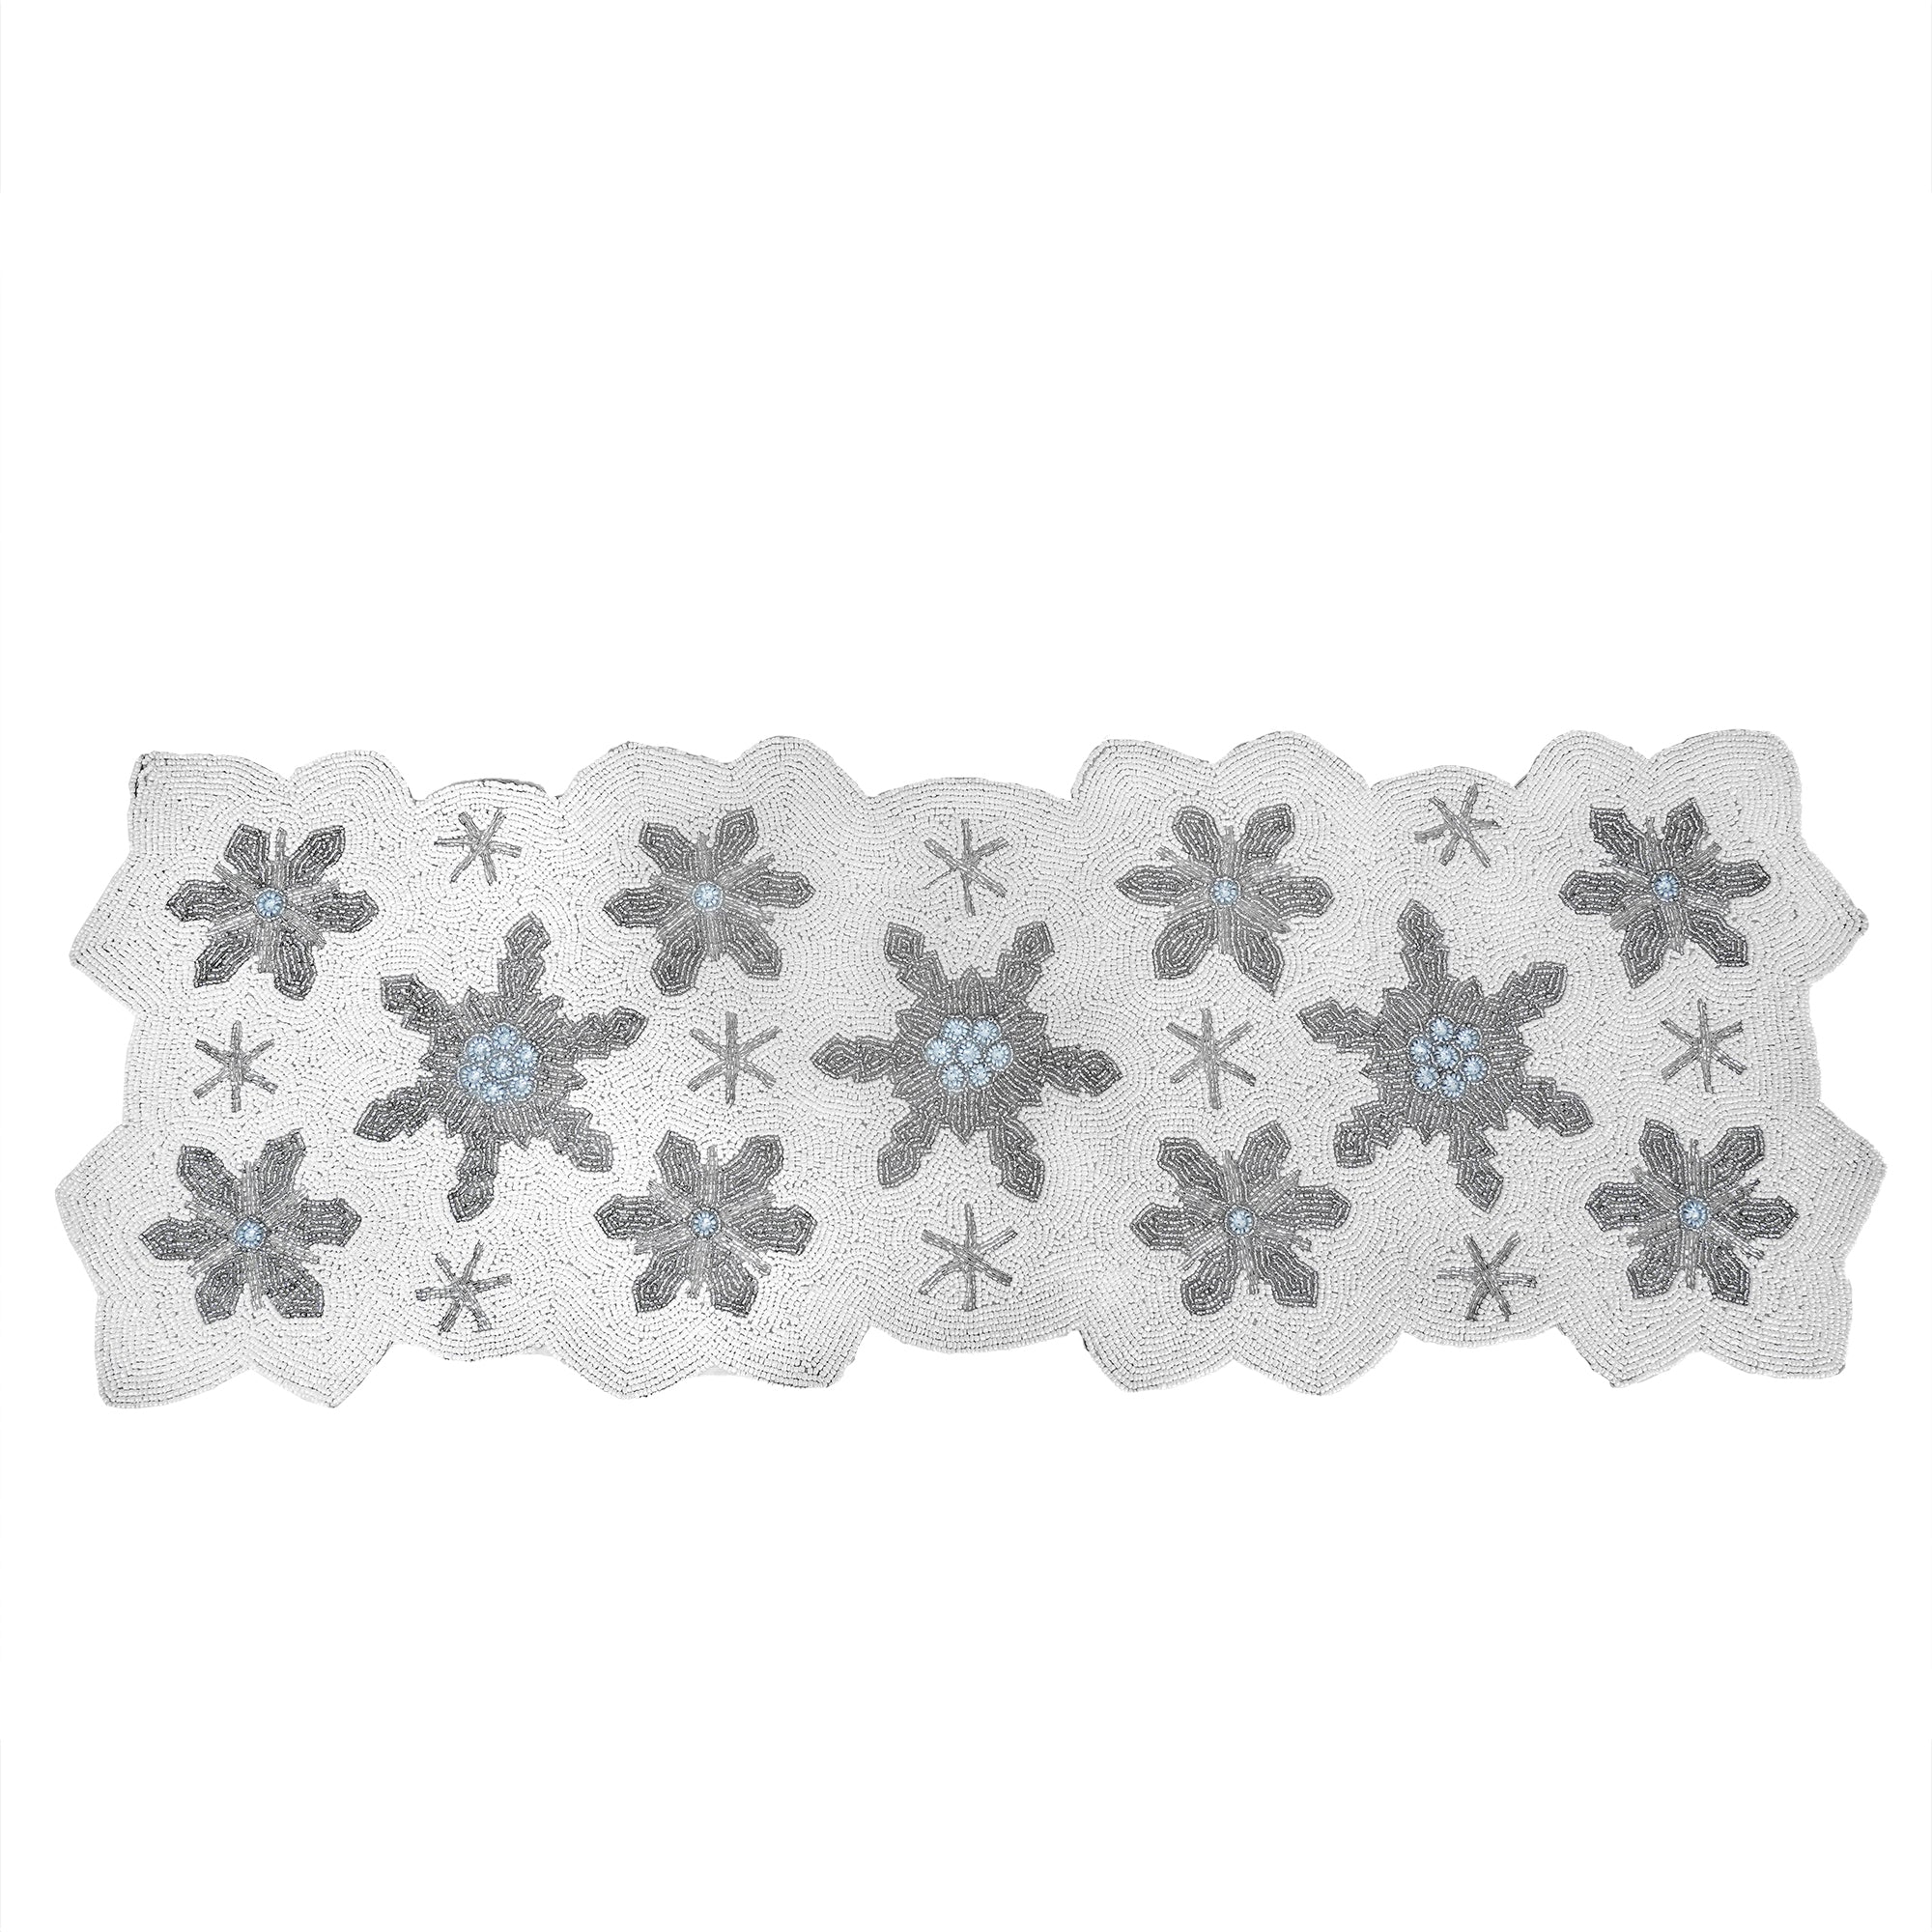 Let it Snow Bead Embroidered Table Runner / White, Silver / 36"x13" / Set of 1 - trunkin.in